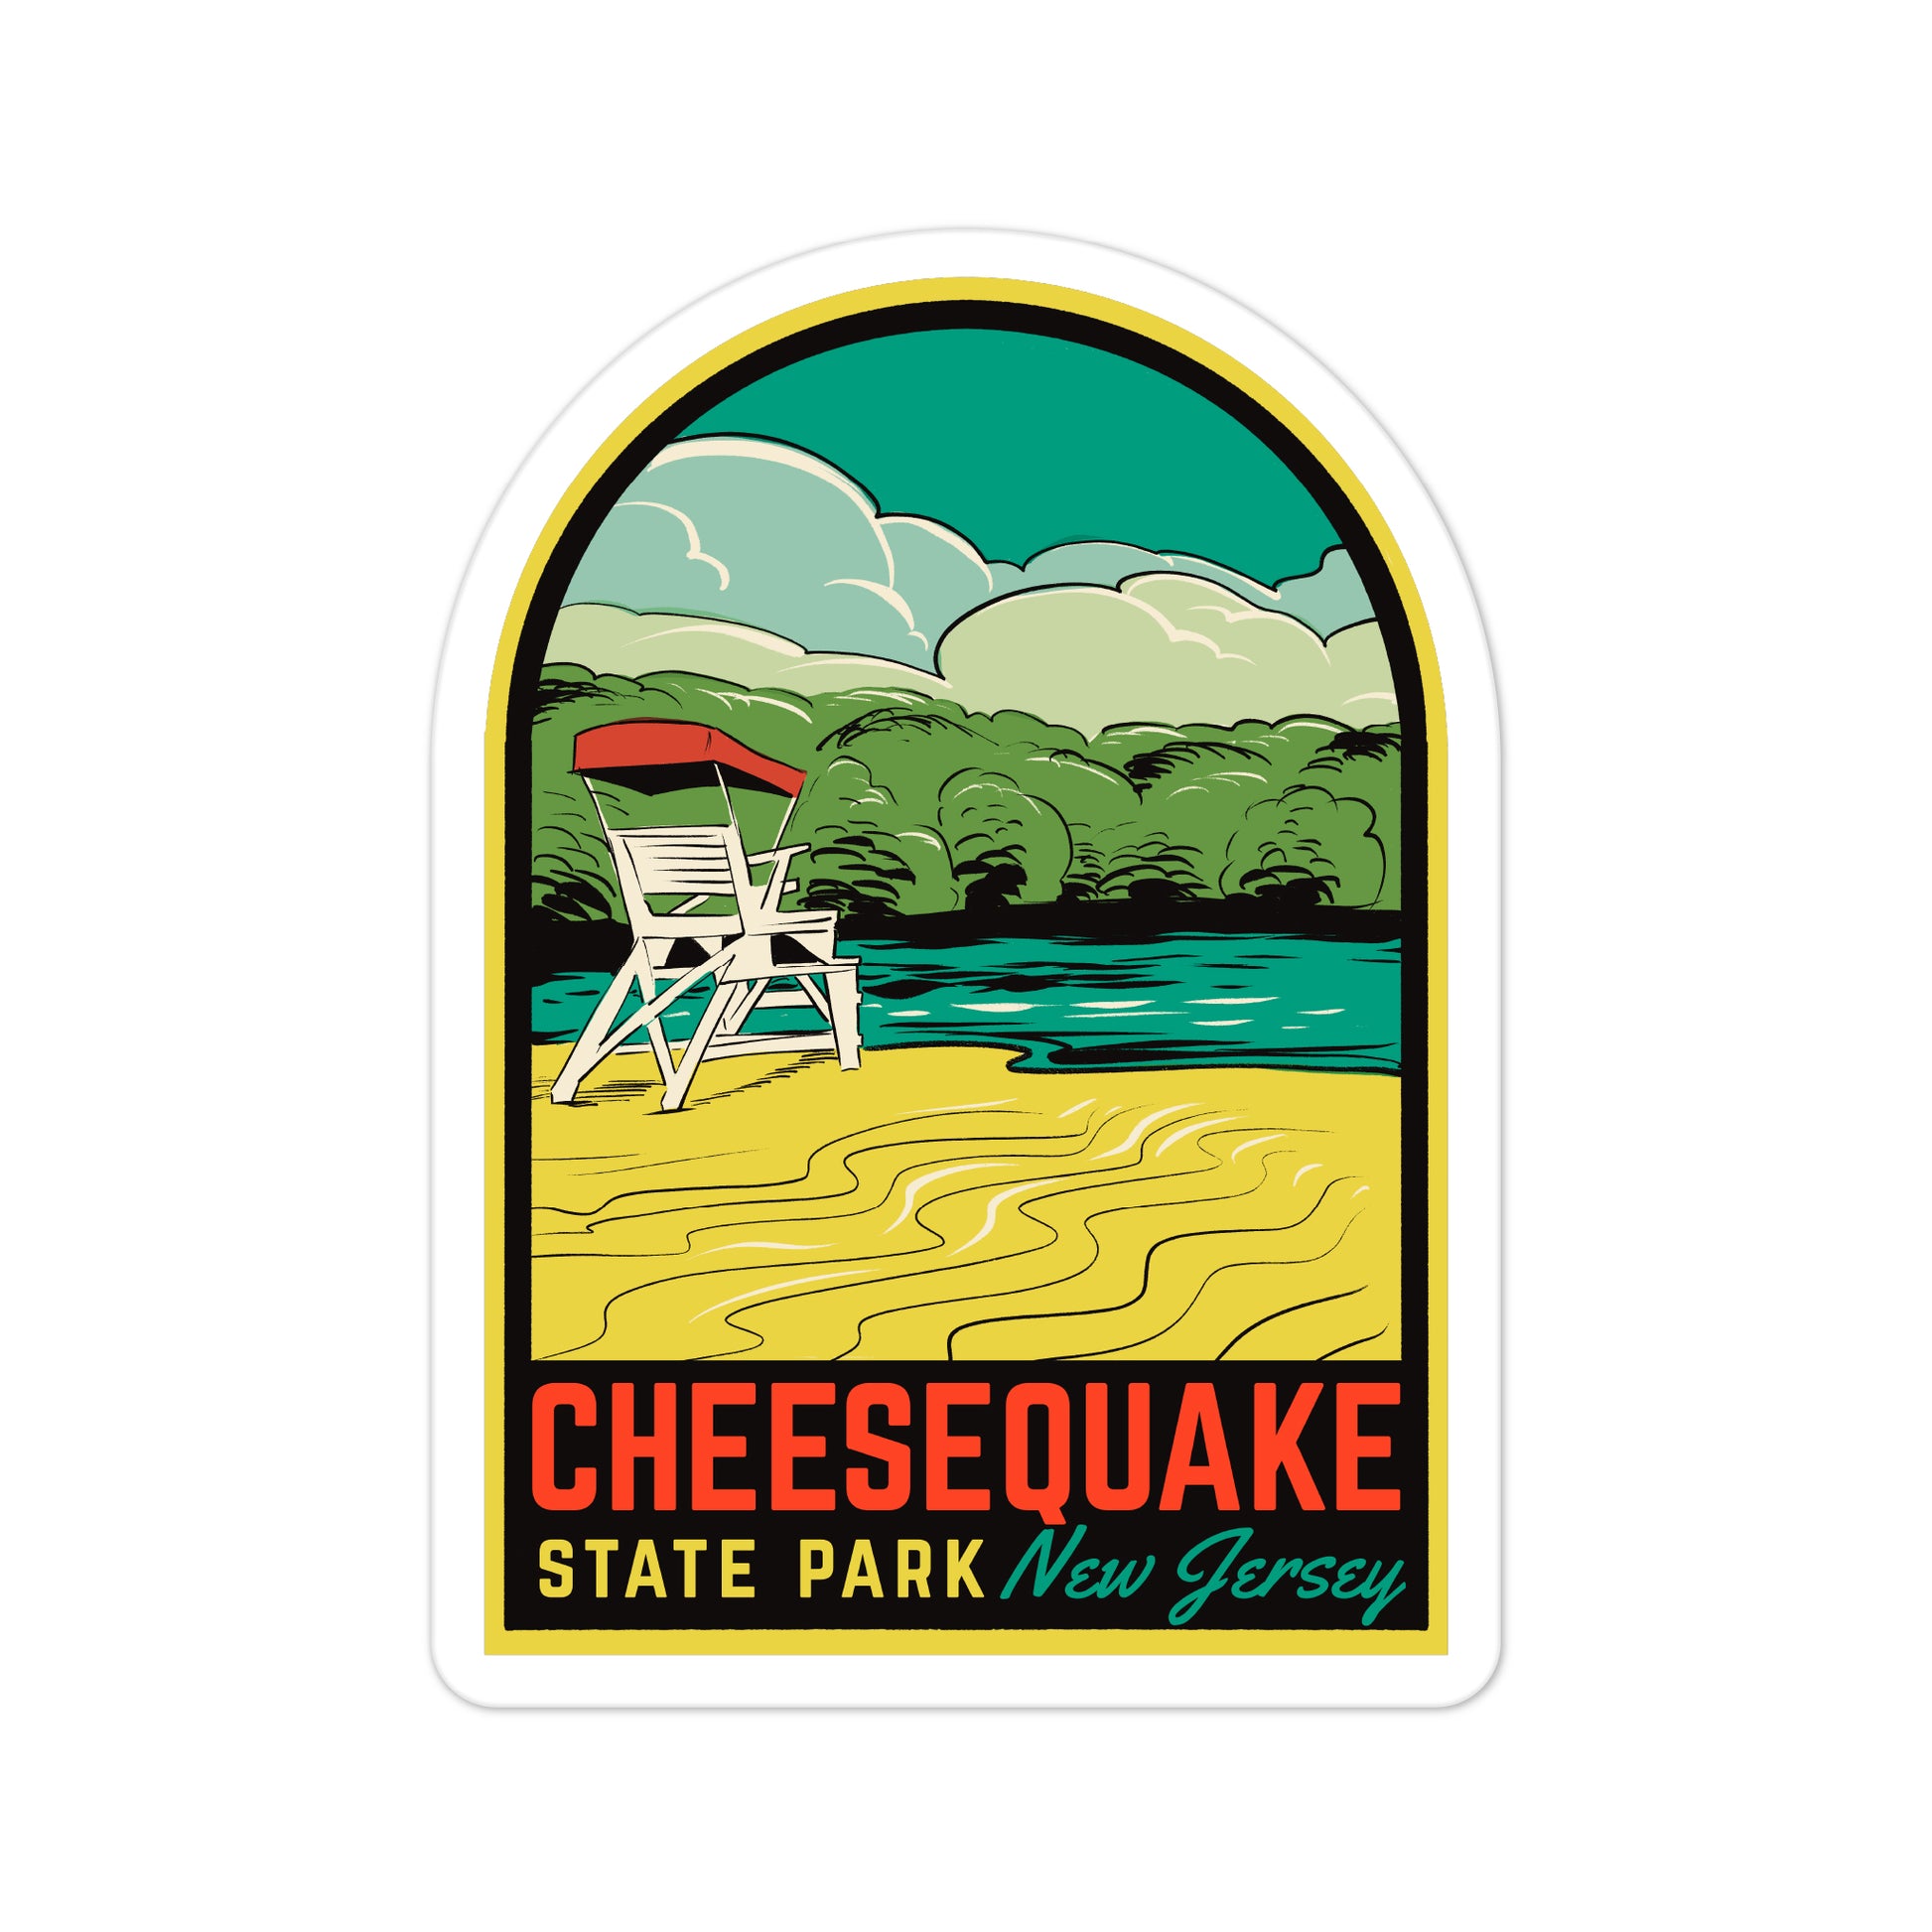 A sticker of Cheesequake State Park